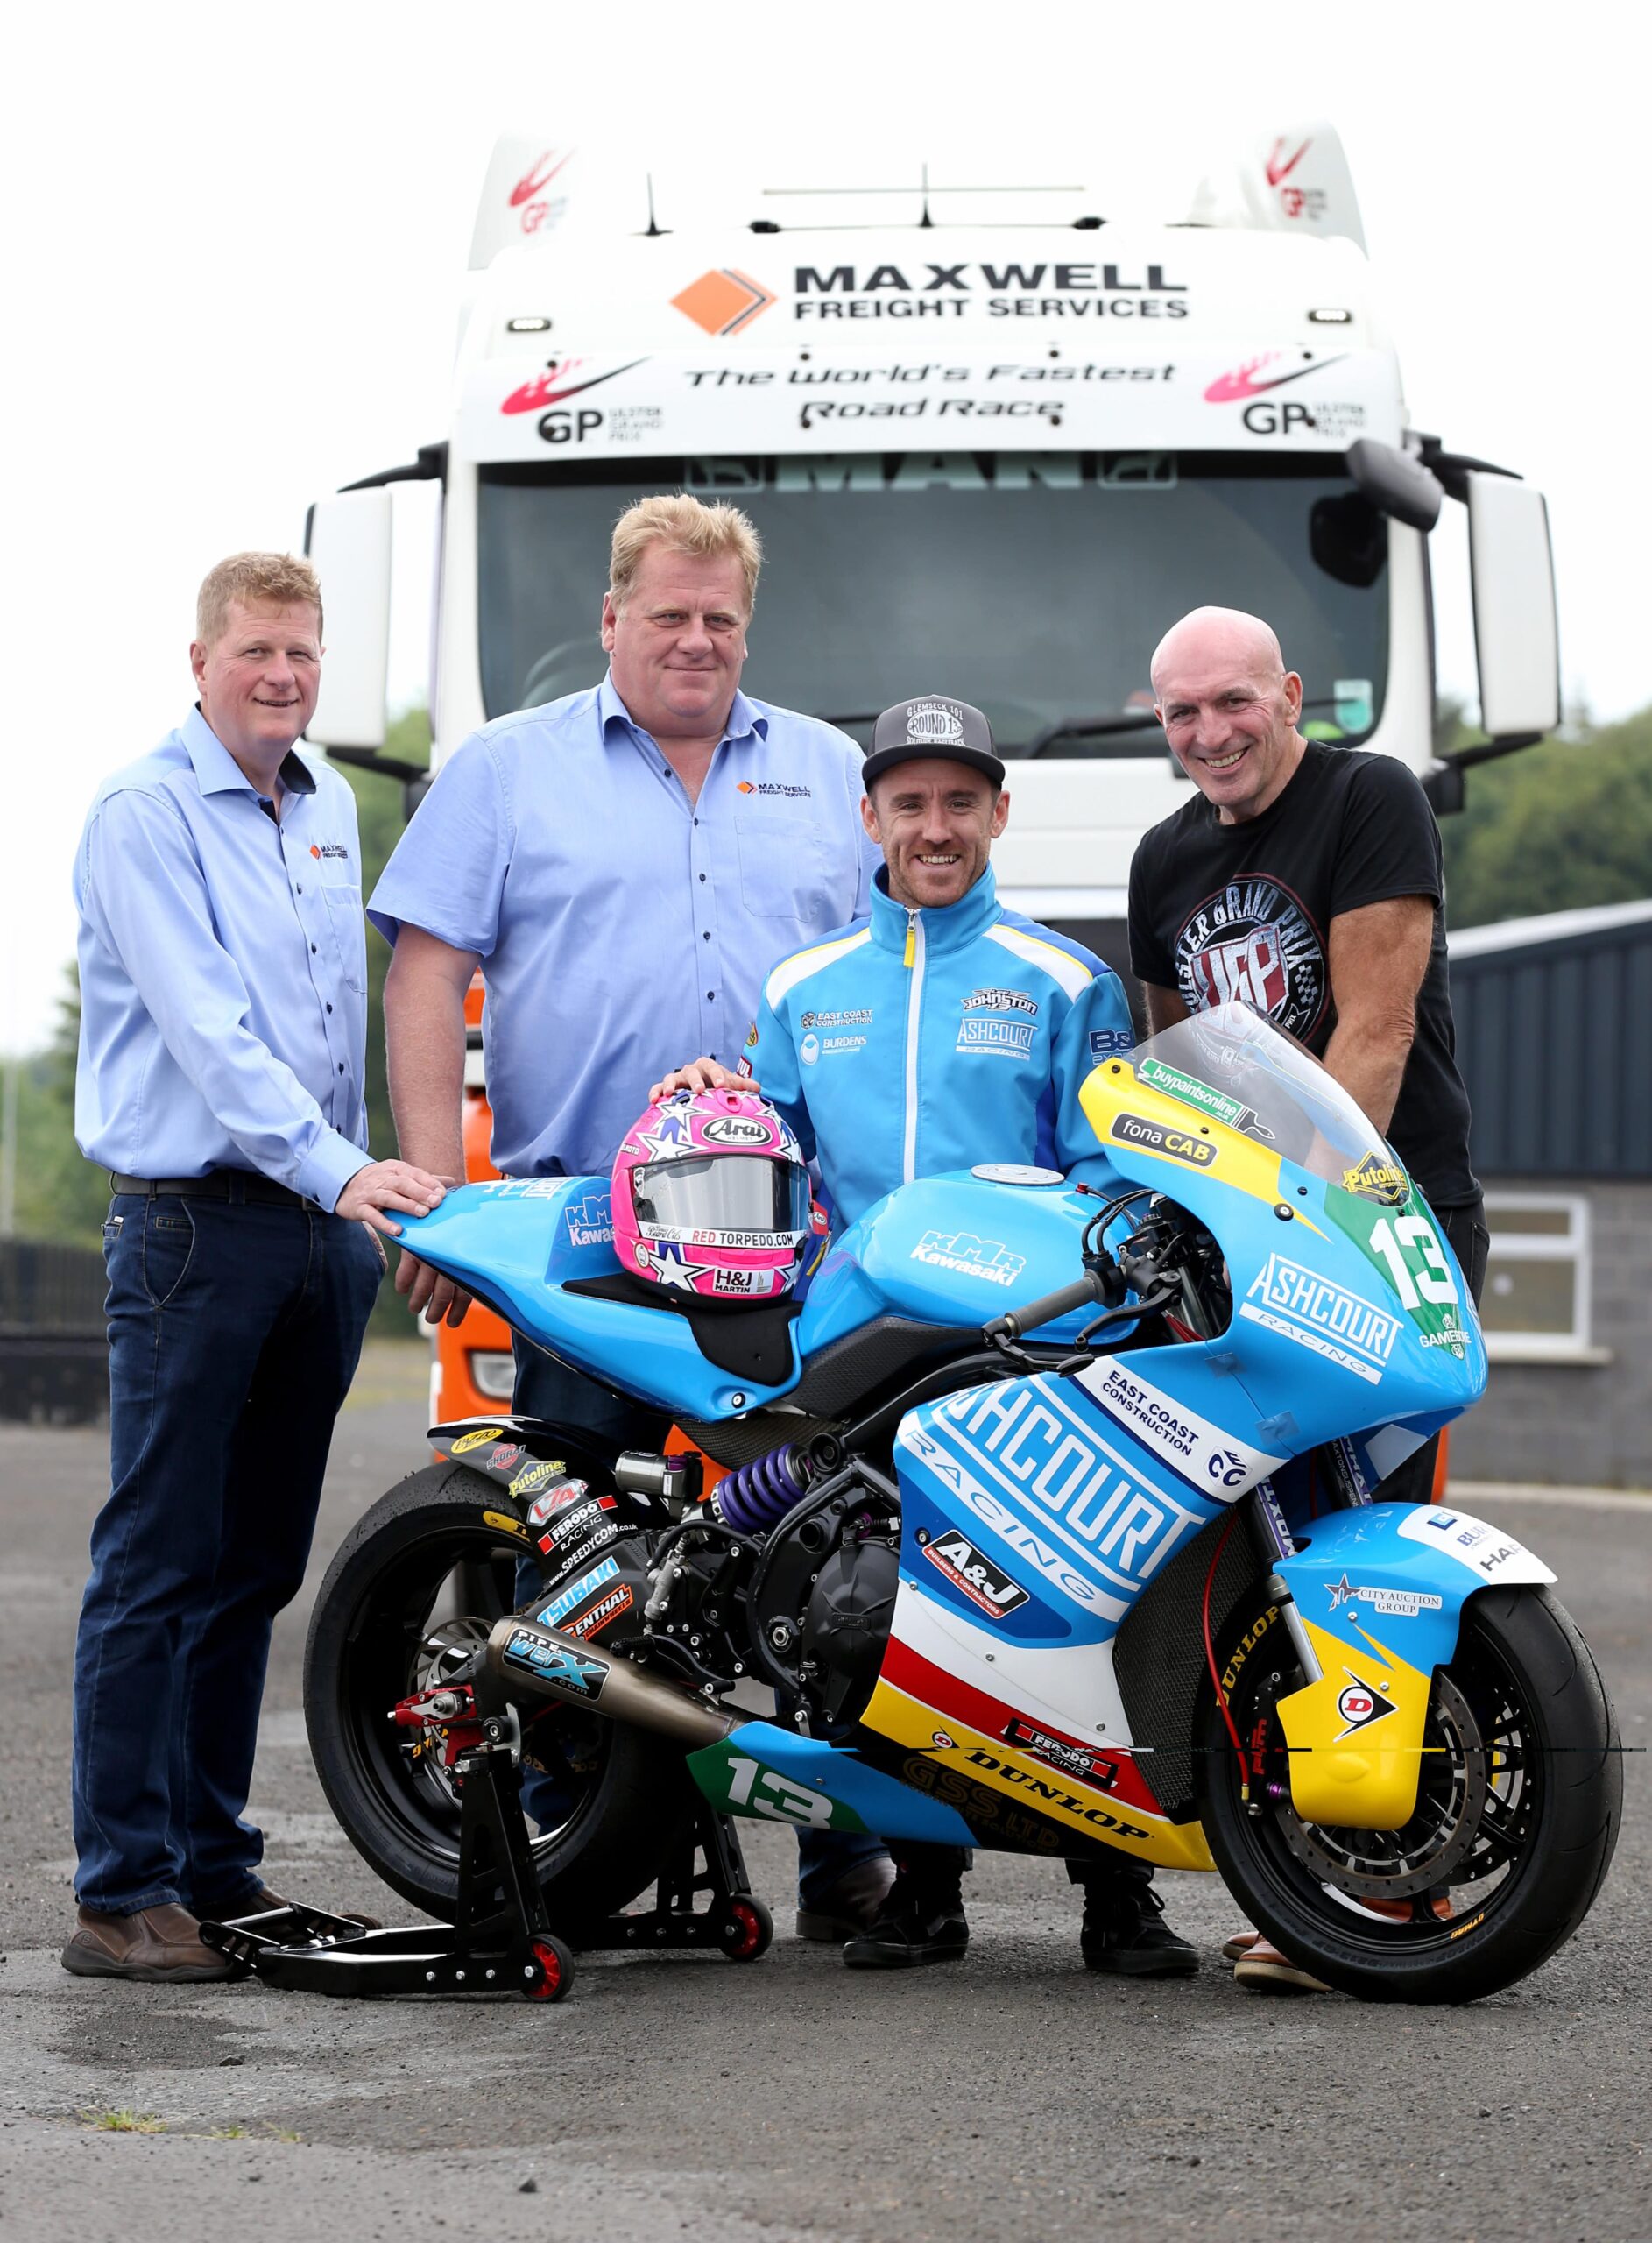 Ulster Grand Prix: Maxwell Freight Services Confirmed As Twins Race 2 Title Sponsors